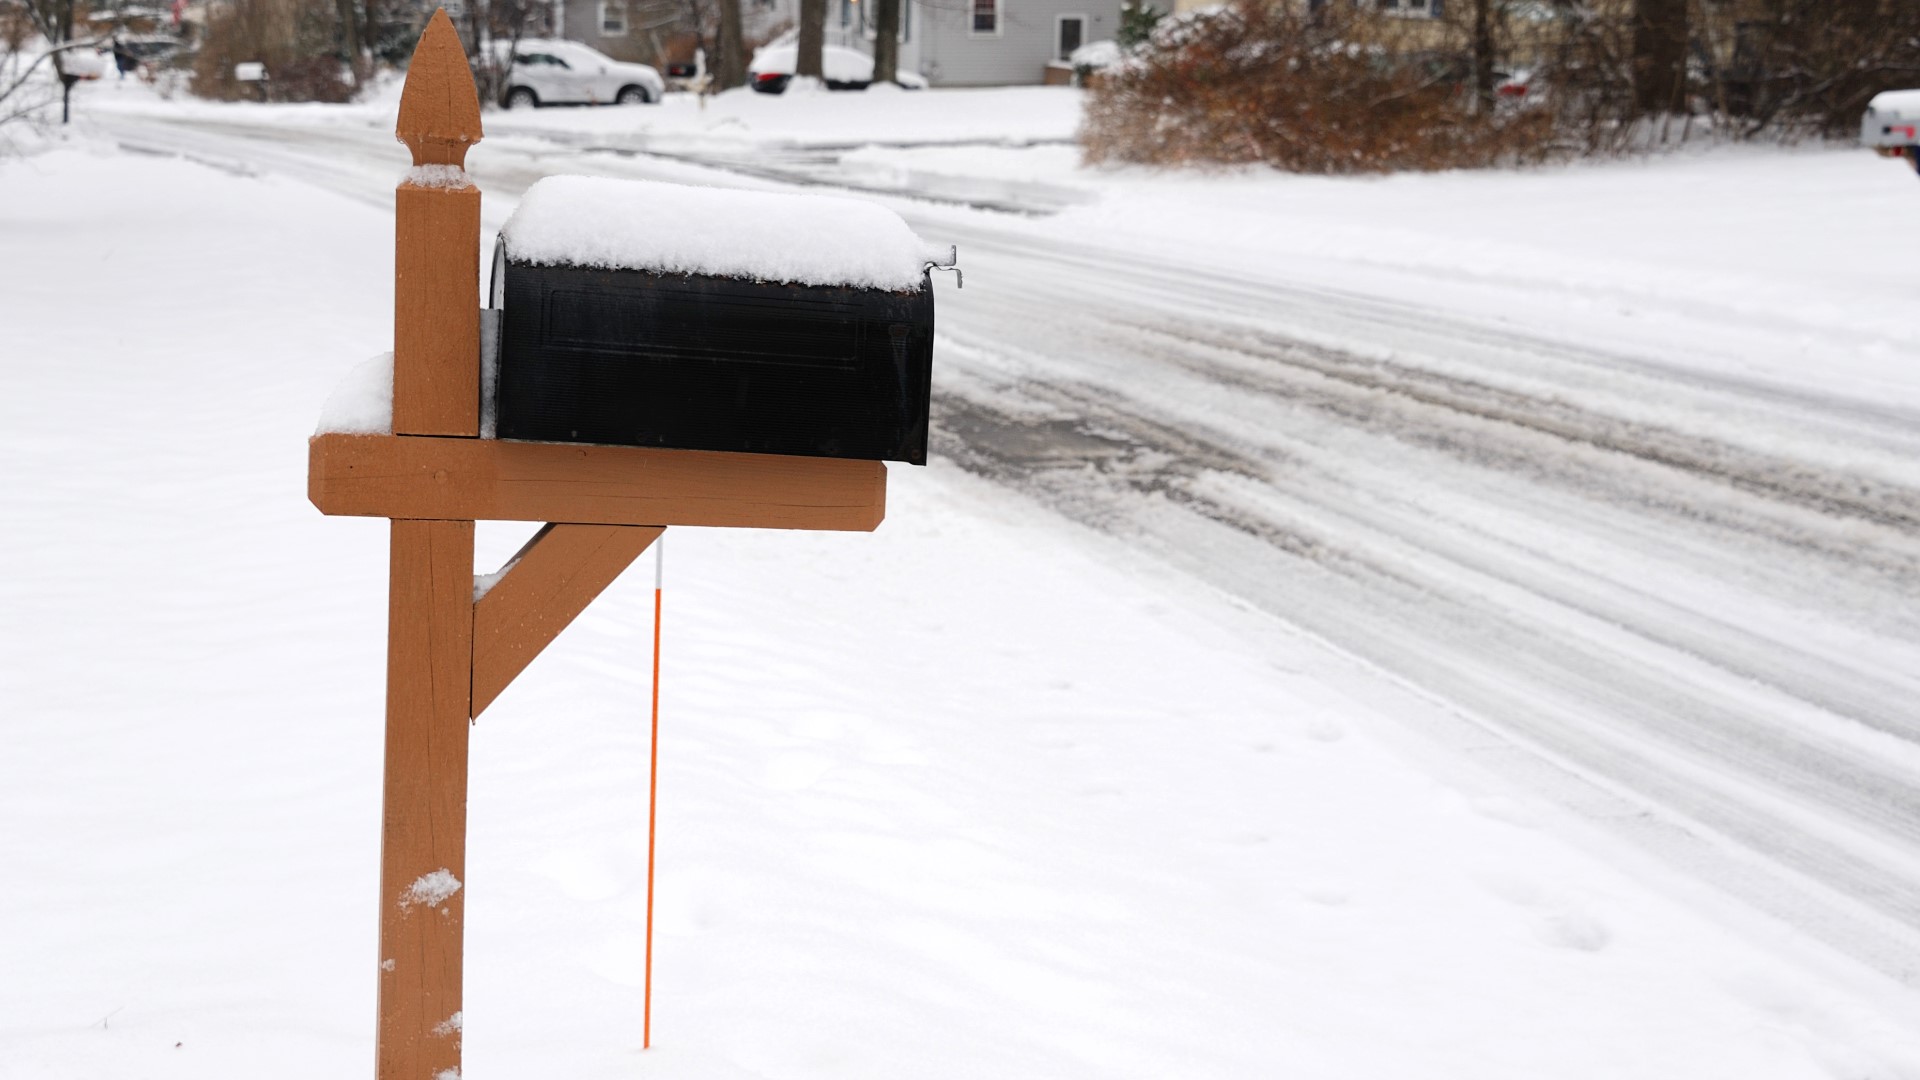 While plow trucks are doing their job clearing streets, a lot of the time there’s nowhere for that snow and ice to go but to pile up right in front of your mailbox.